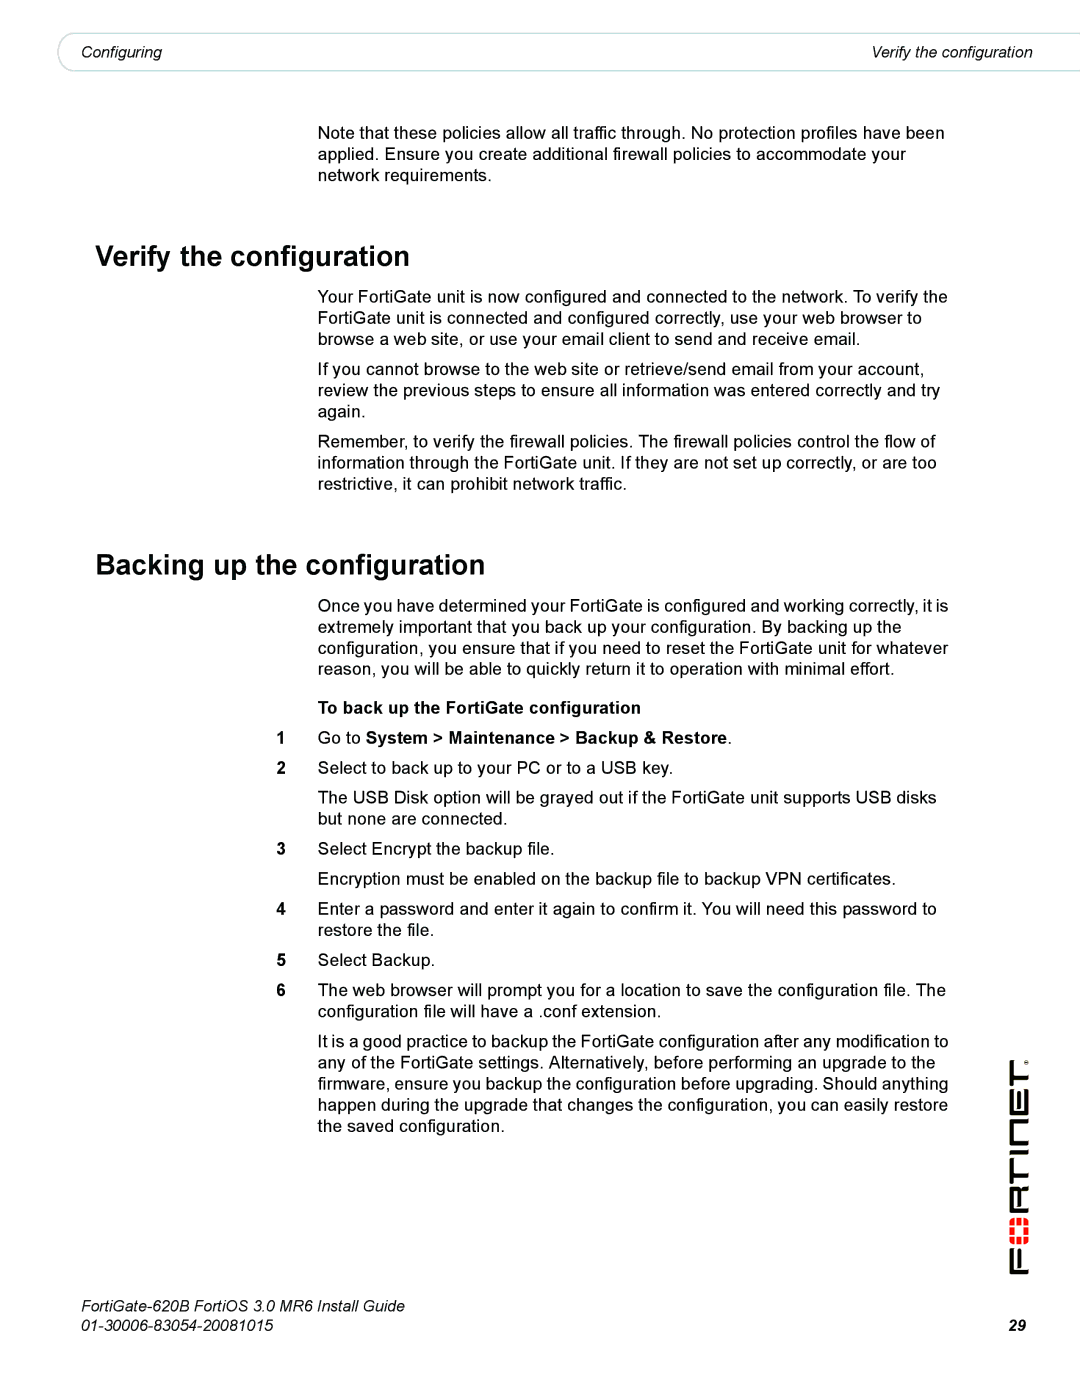 Fortinet 620B manual Verify the configuration, Backing up the configuration 